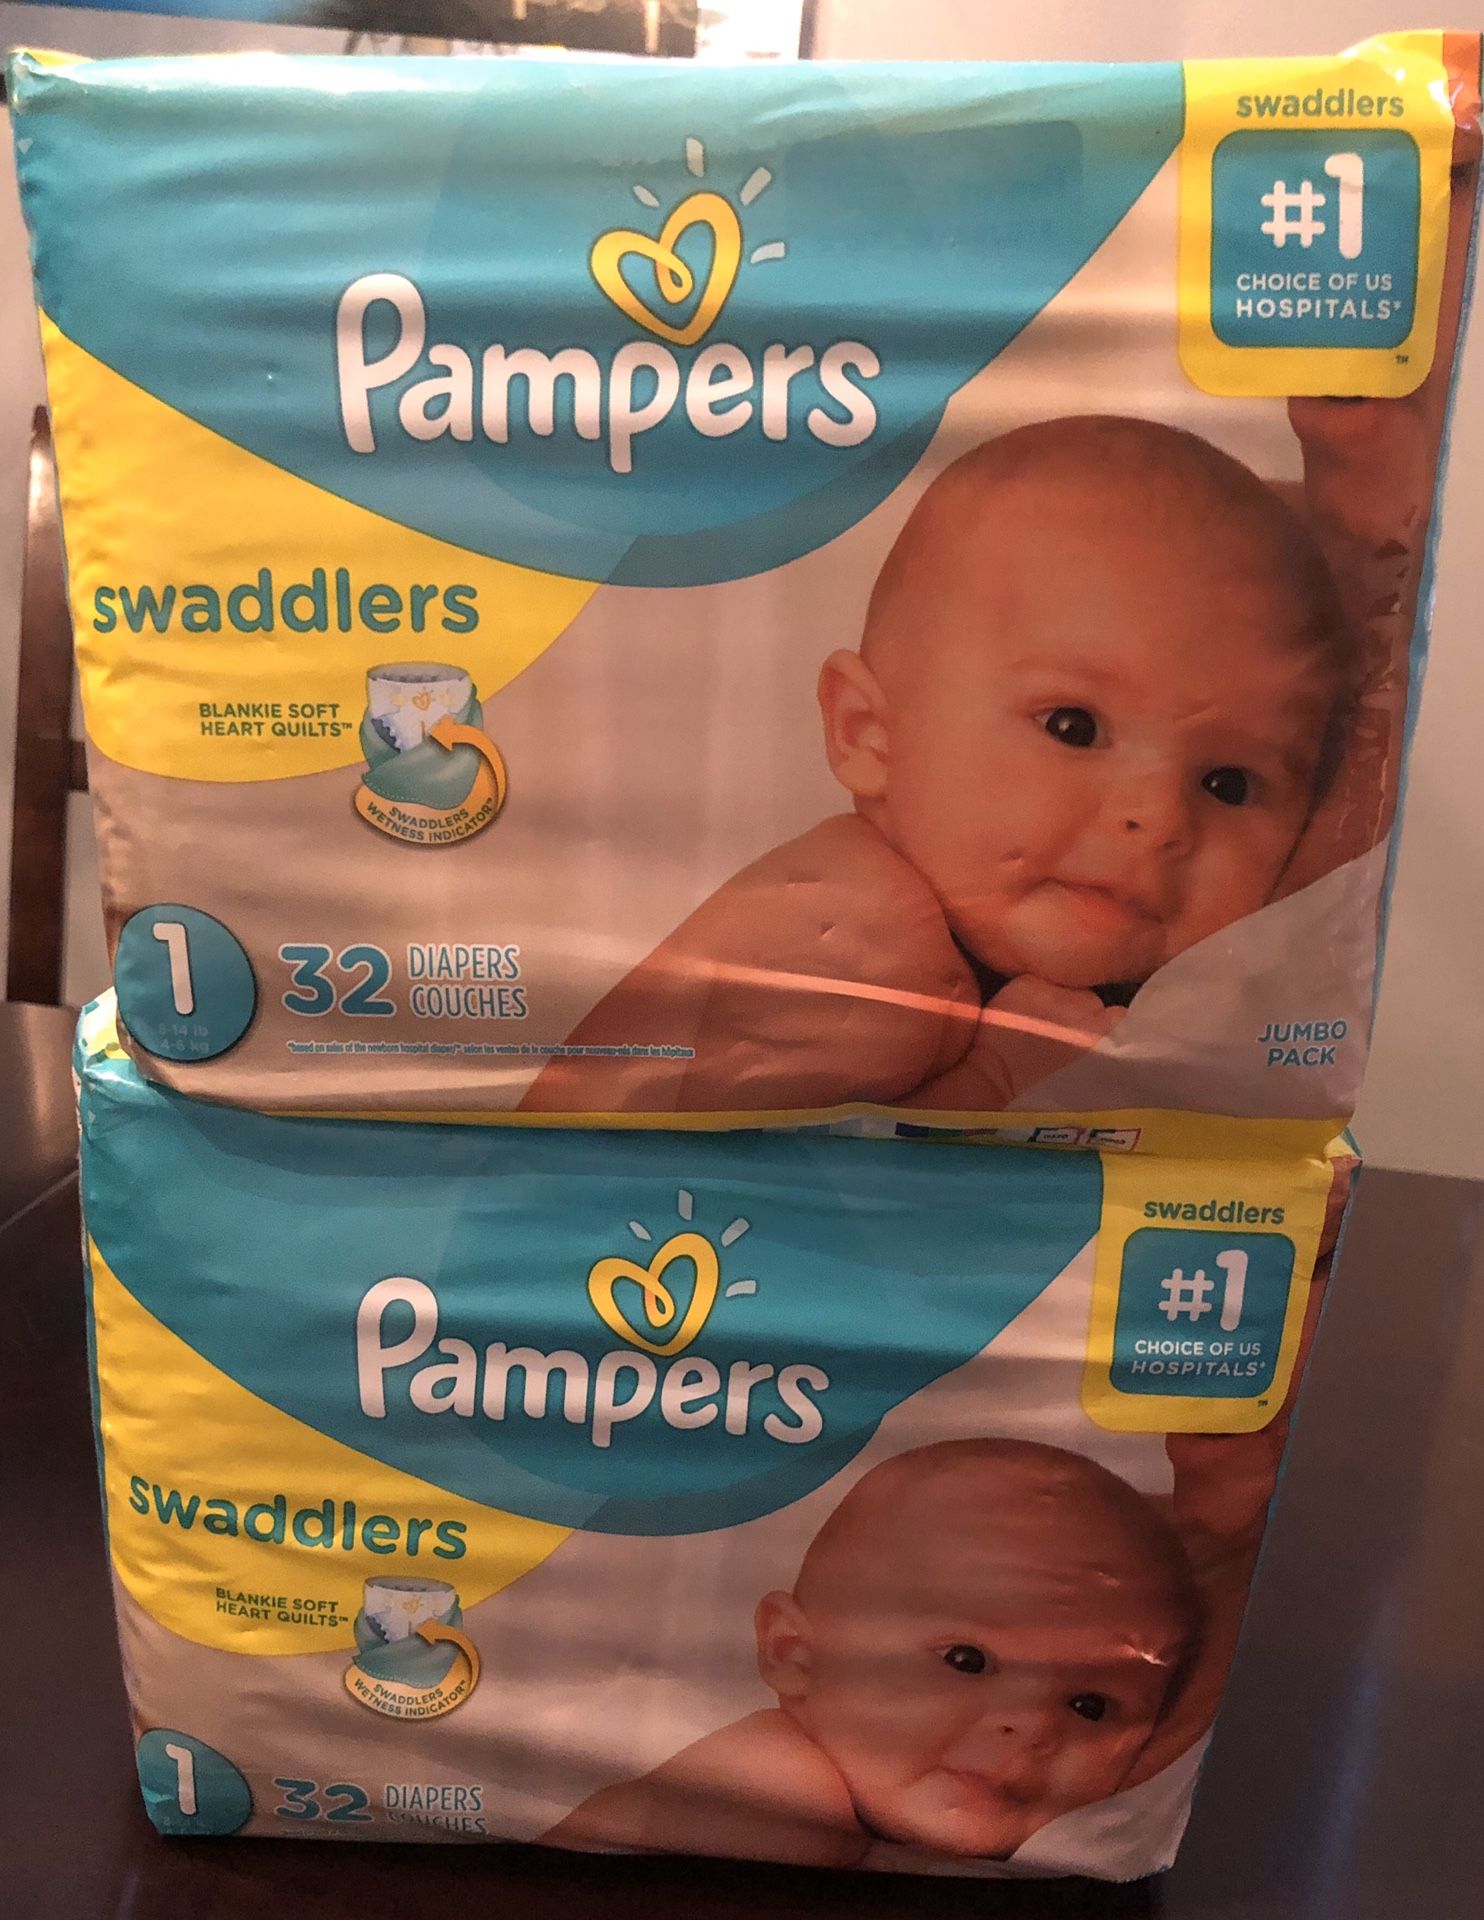 Pampers swaddlers size 1